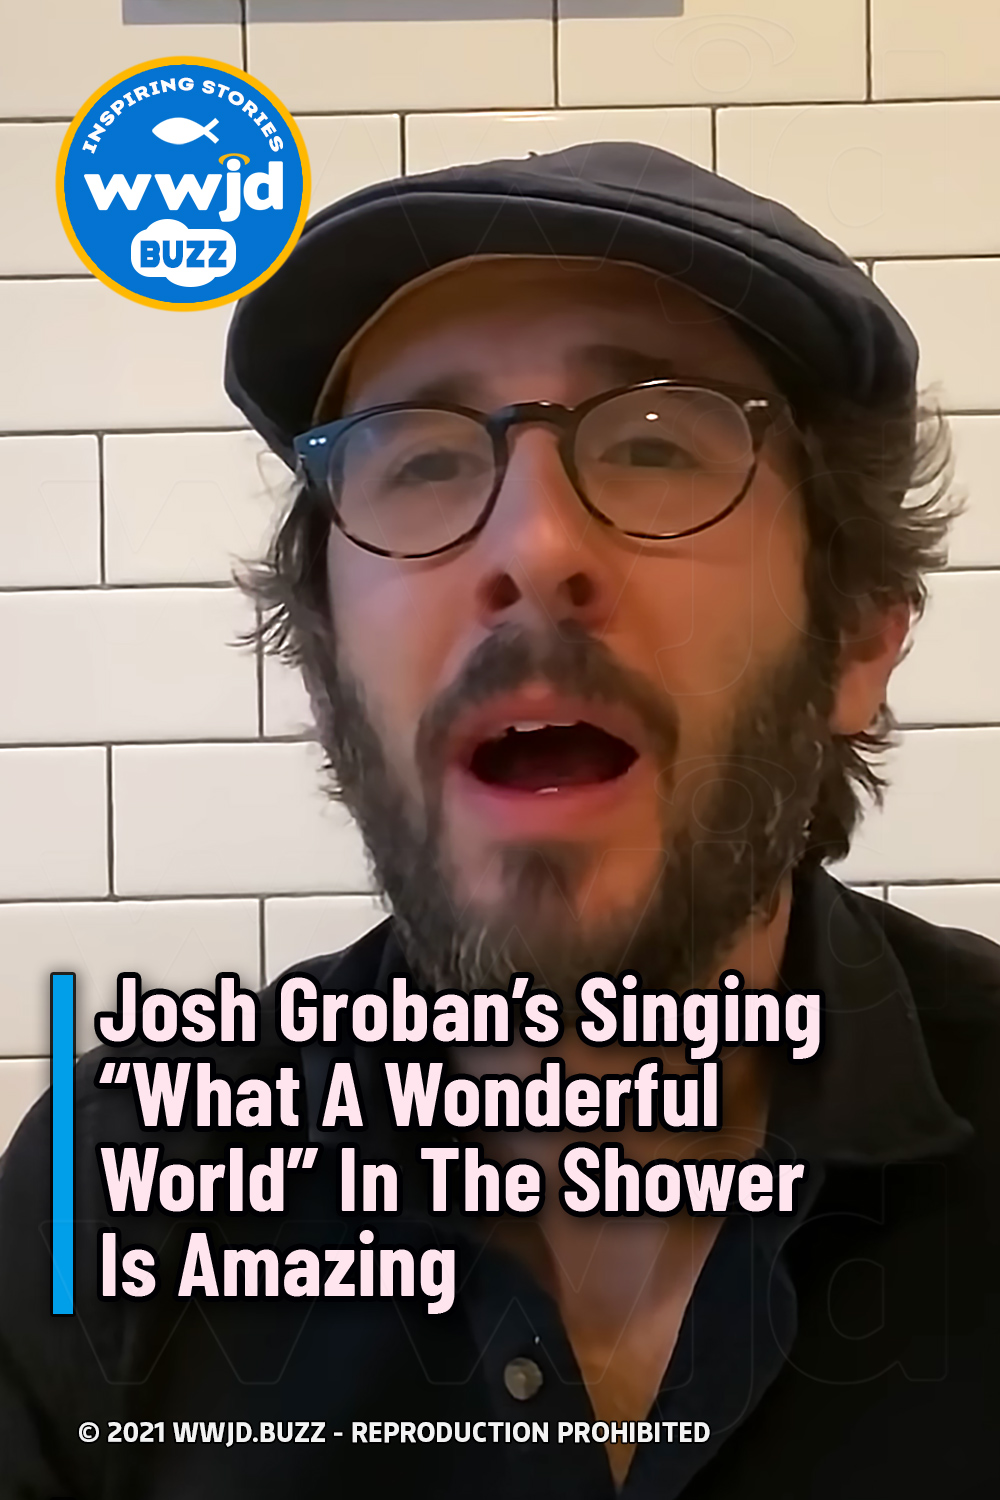 Josh Groban’s Singing “What A Wonderful World” In The Shower Is Amazing